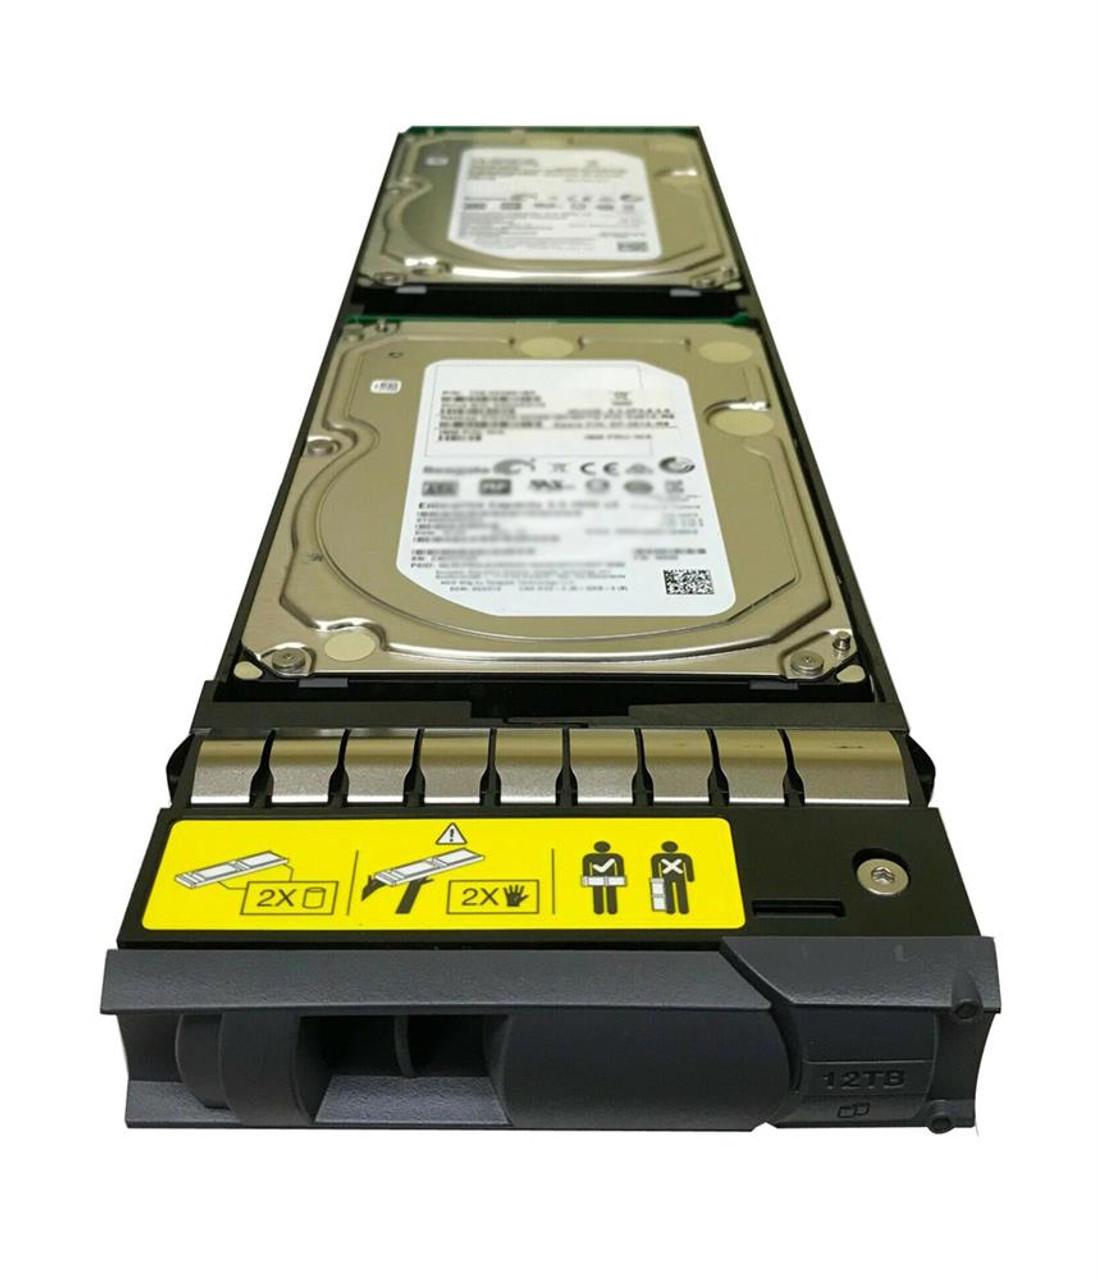 X481A-R6 NetApp 12TB (2 x 6TB) 7200RPM SATA 6Gbps 3.5-inch Internal Hard Drive with Carrier for DS4486 (2-Pack)